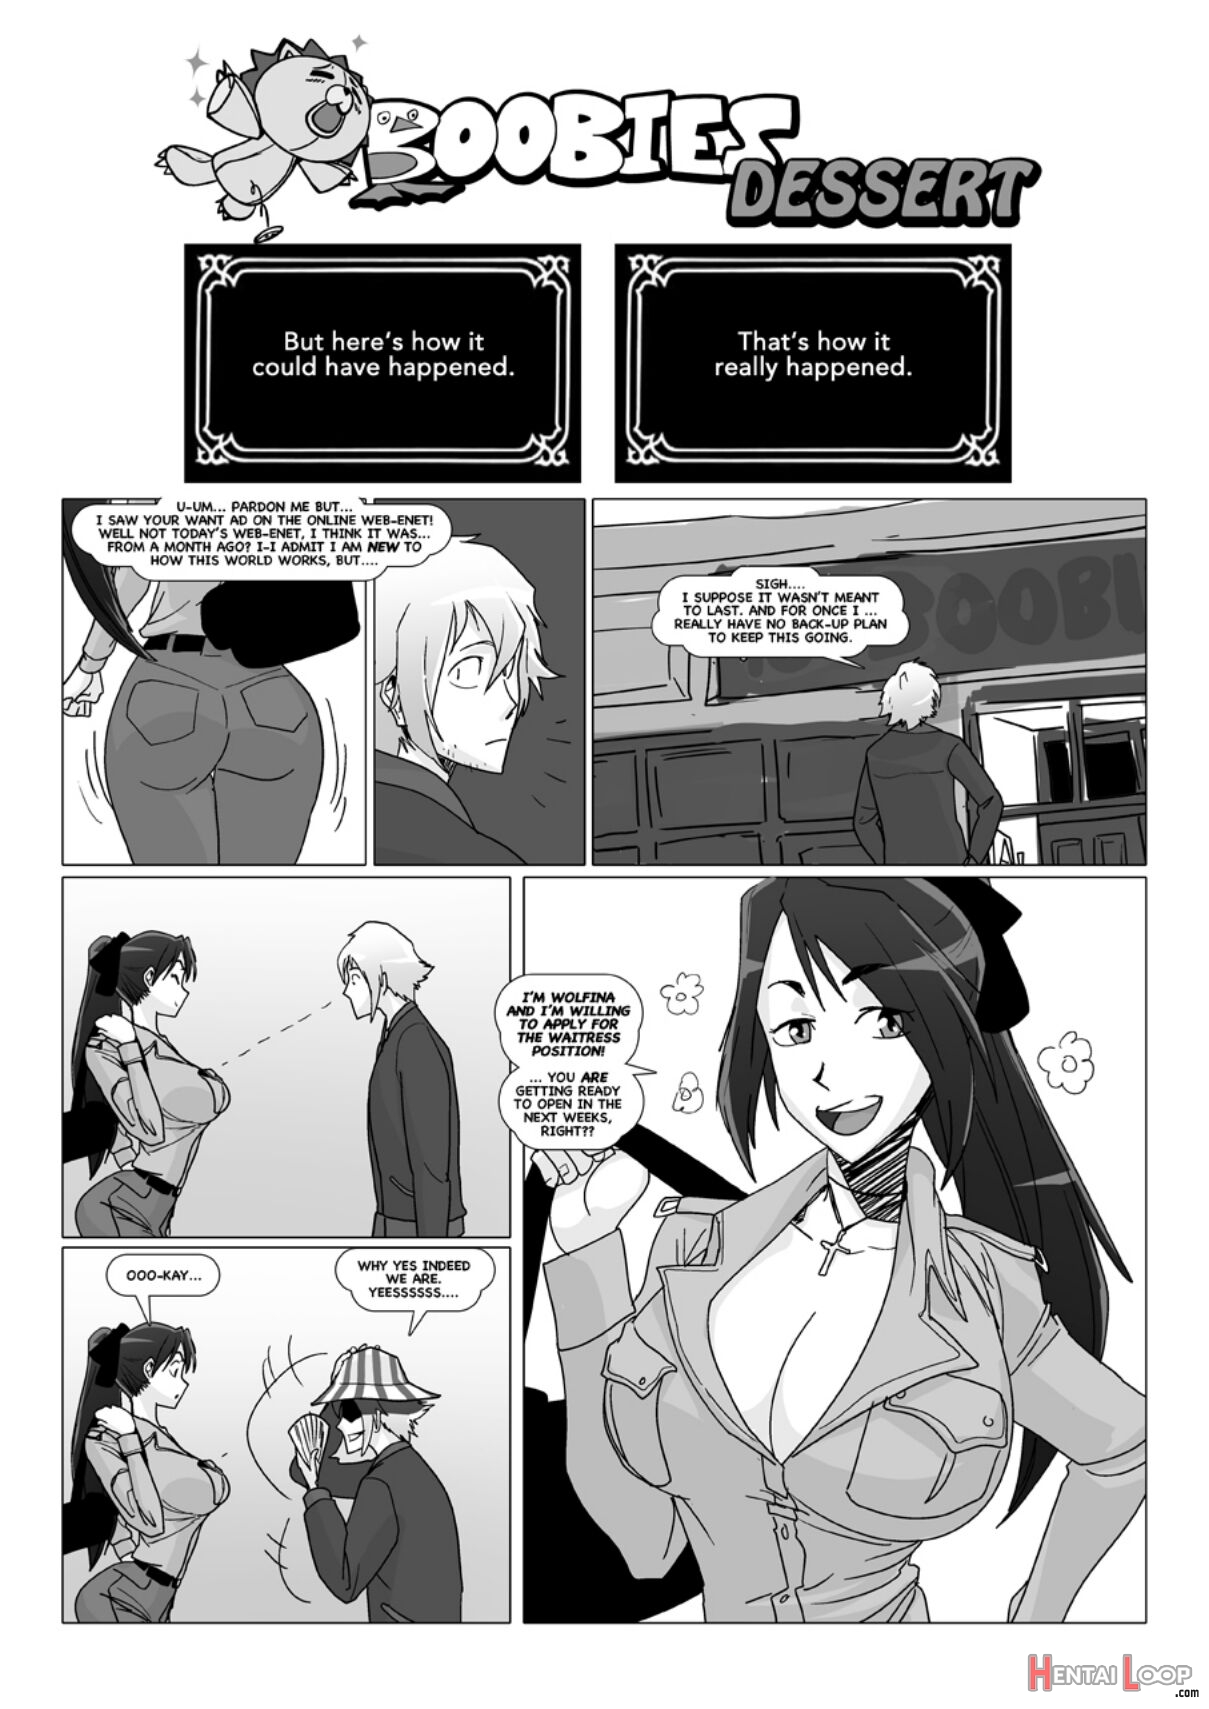 Happy To Serve You - Xxx Version page 517